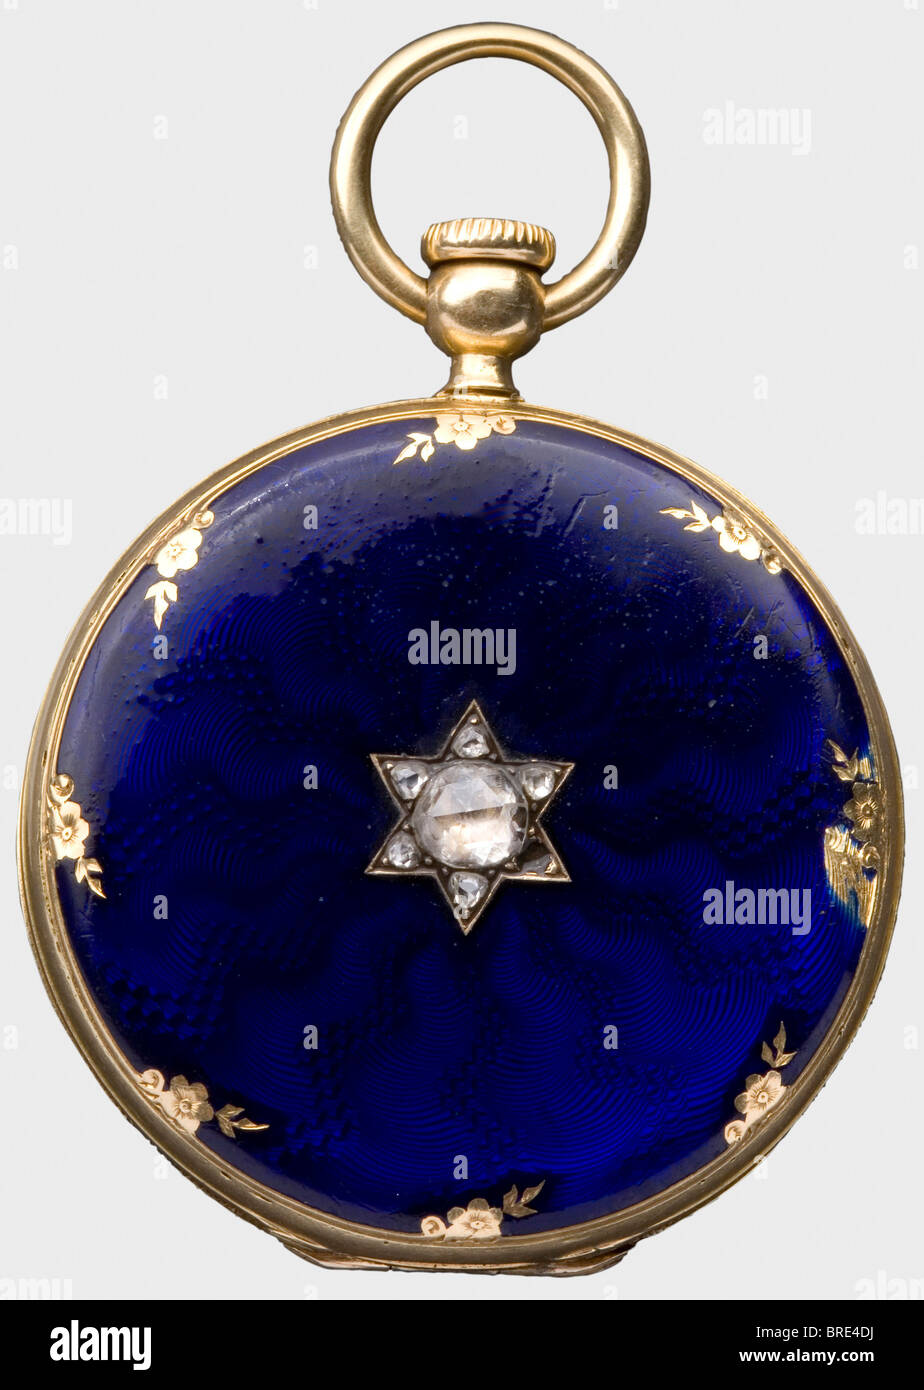 A personal Patek Philippe savonette, displaying the Madonna of Ostrabrama, 1850/52 Case and factory number '4422'. 18-carat gold with dark blue enamel on a wavy guilloche background. 38 diamonds, in Old European cut (three missing), in the shape of a floral bouquet on the front cover (marks of wear), and with six diamonds, in Old European cut (one missing) on the back cover in a star pattern. Signed, 'Patek Philippe & Co à Genève' inside the front lid. White enamel dial with Roman numerals and blued-steel Breguet hands. Functional, flat cylinder works with blue, Stock Photo